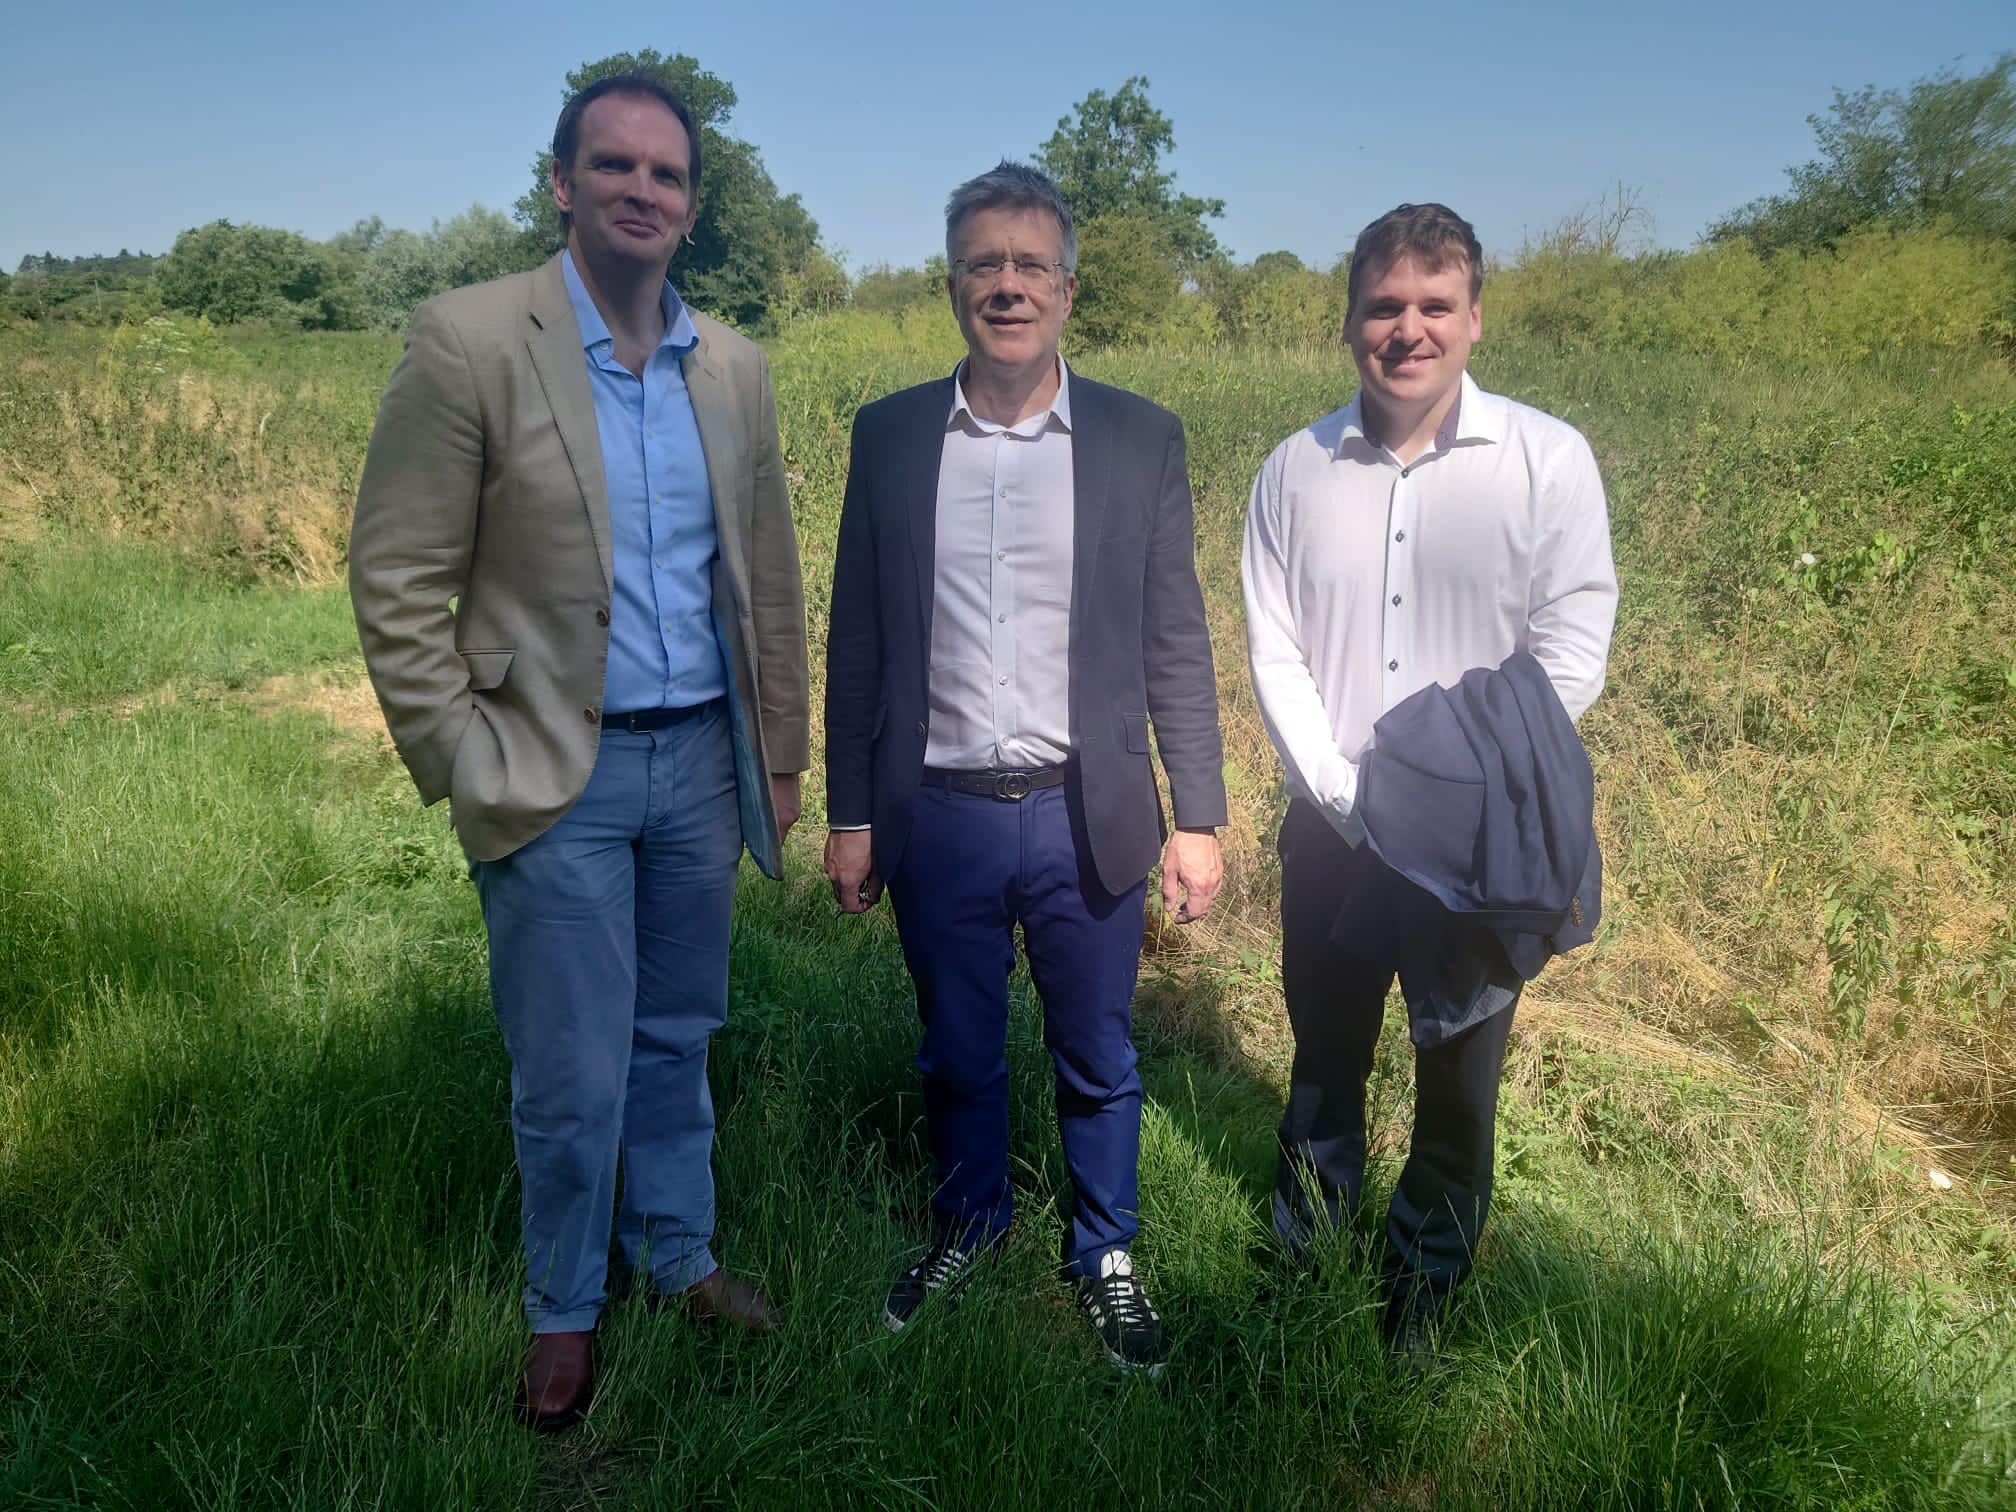 Meeting with Dr Dan Poulter MP, the River Gipping Trust and Suffolk County Council about making the river more pedestrian friendly